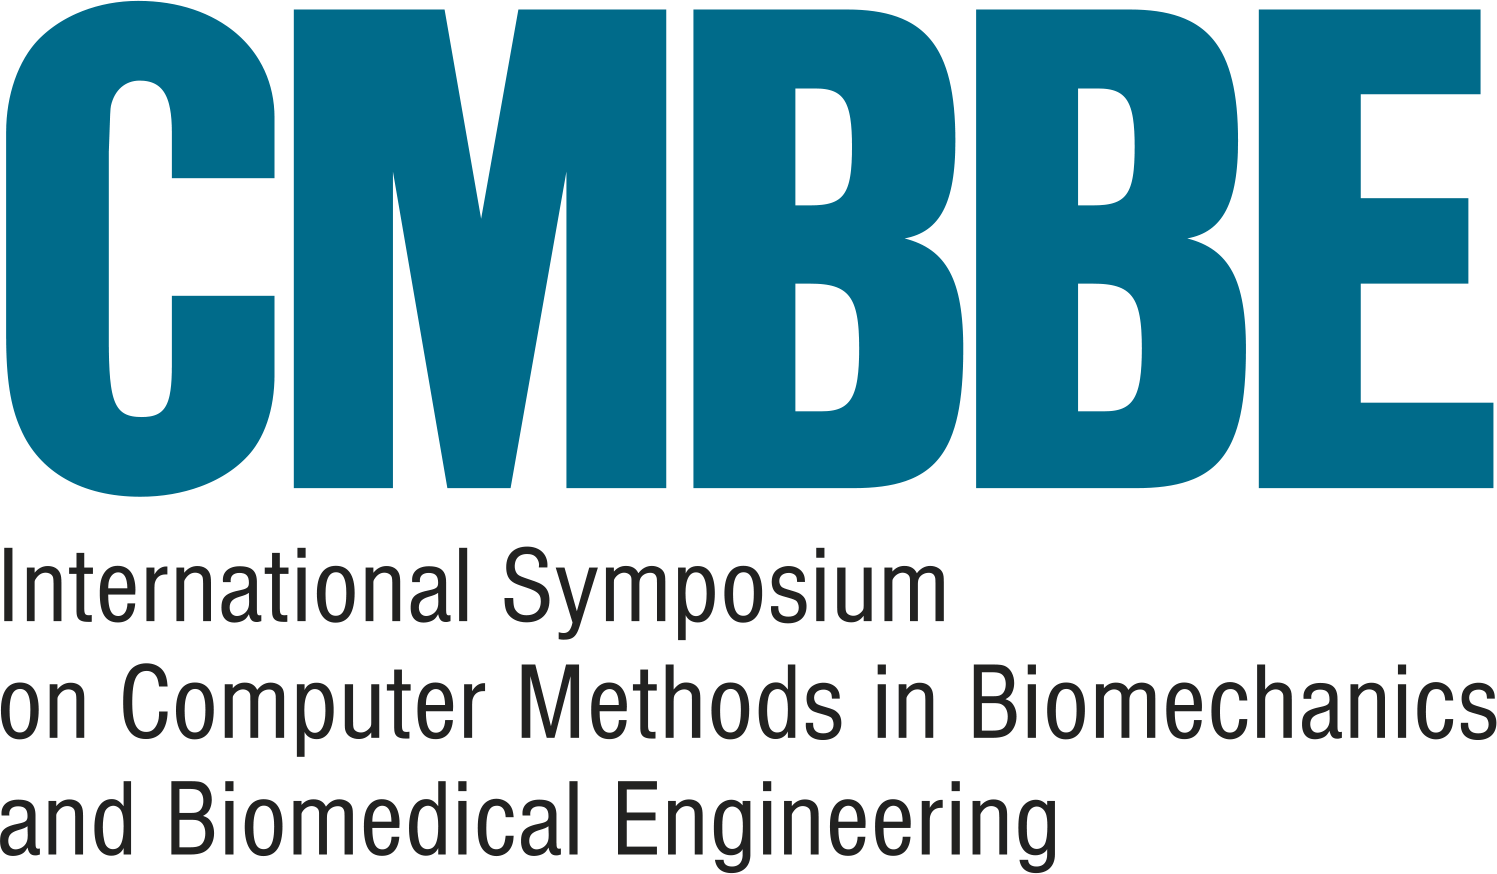 CMBBE Symposium